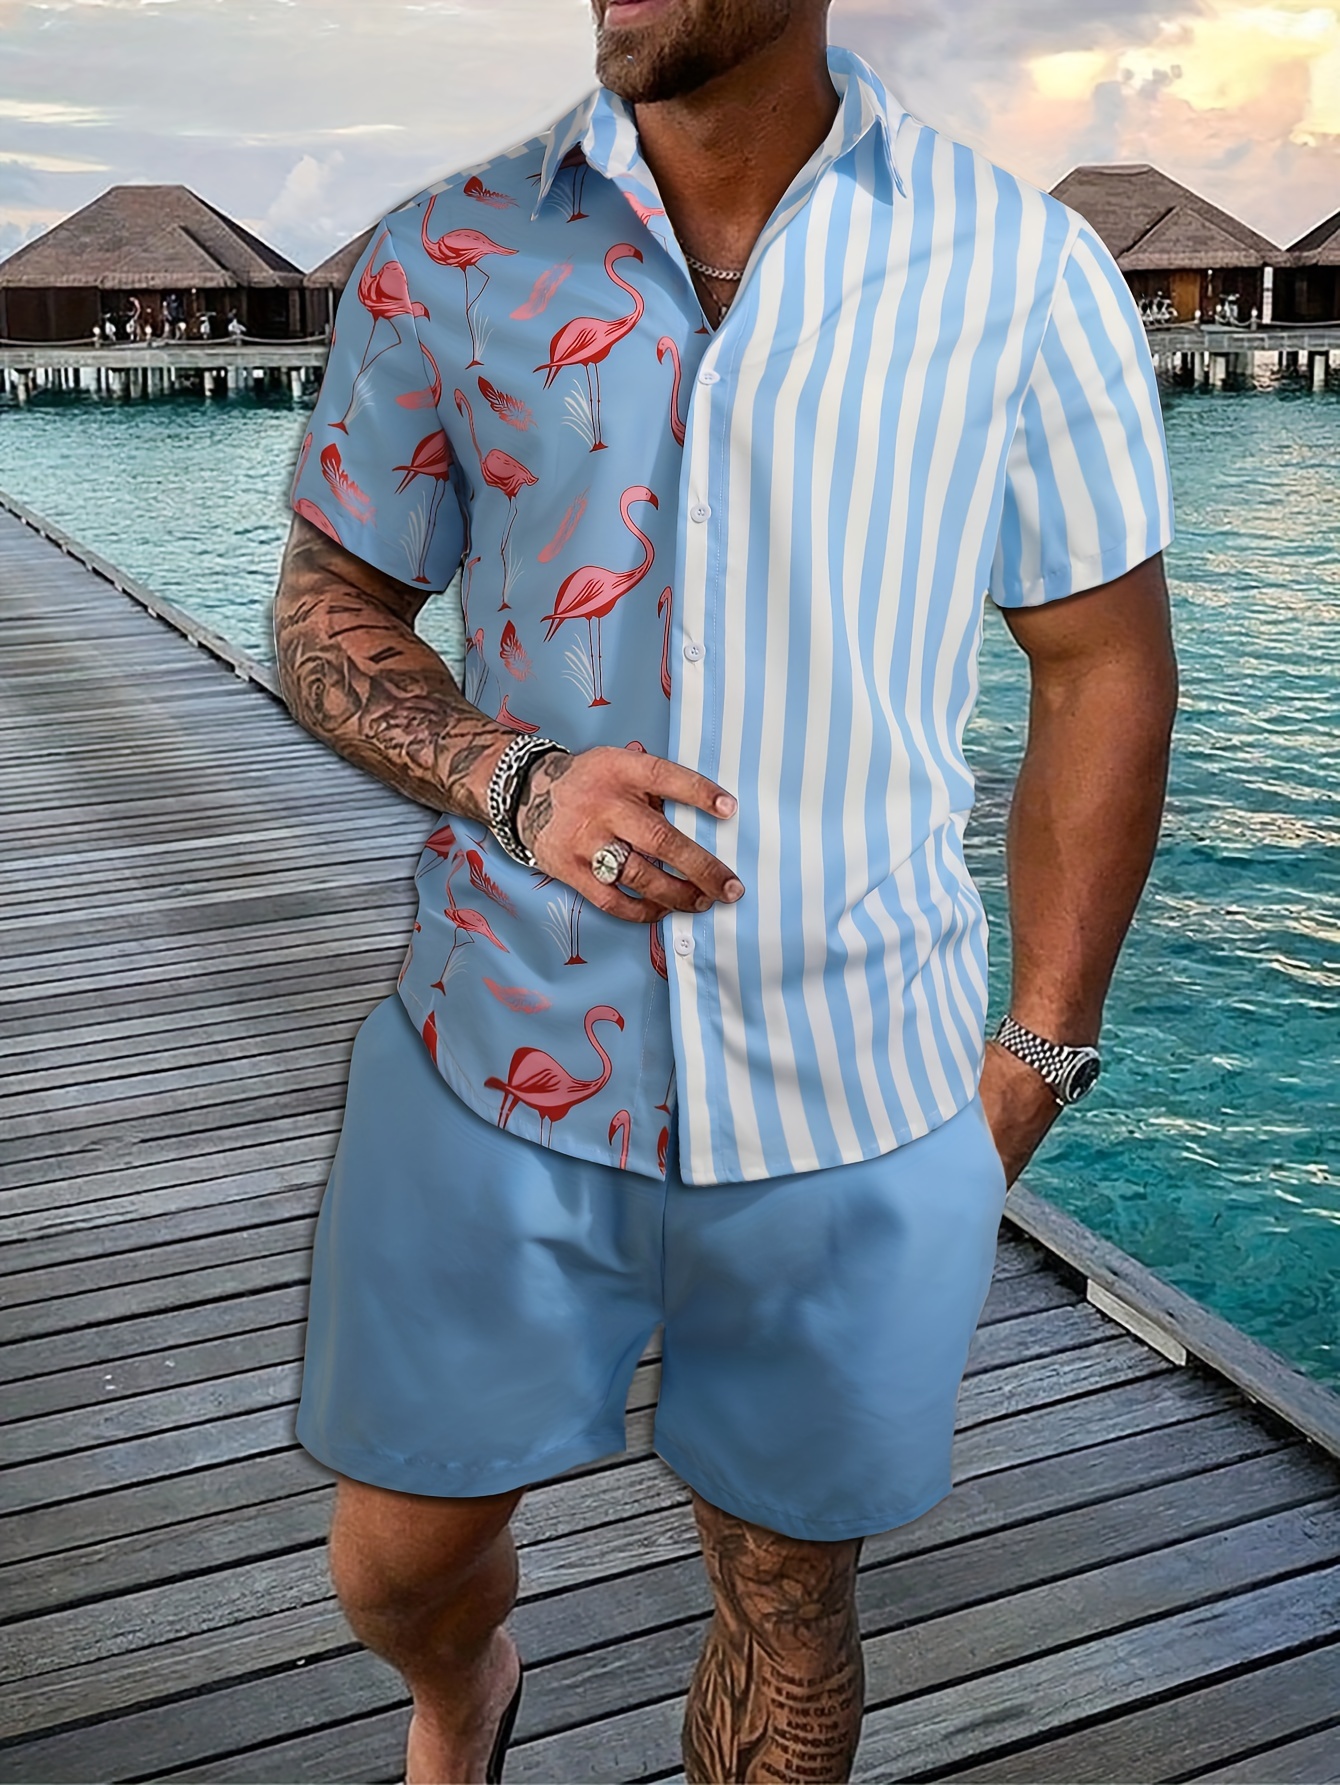 Men's Outfits, Flamingo And Strip Print Button Up Shirt And